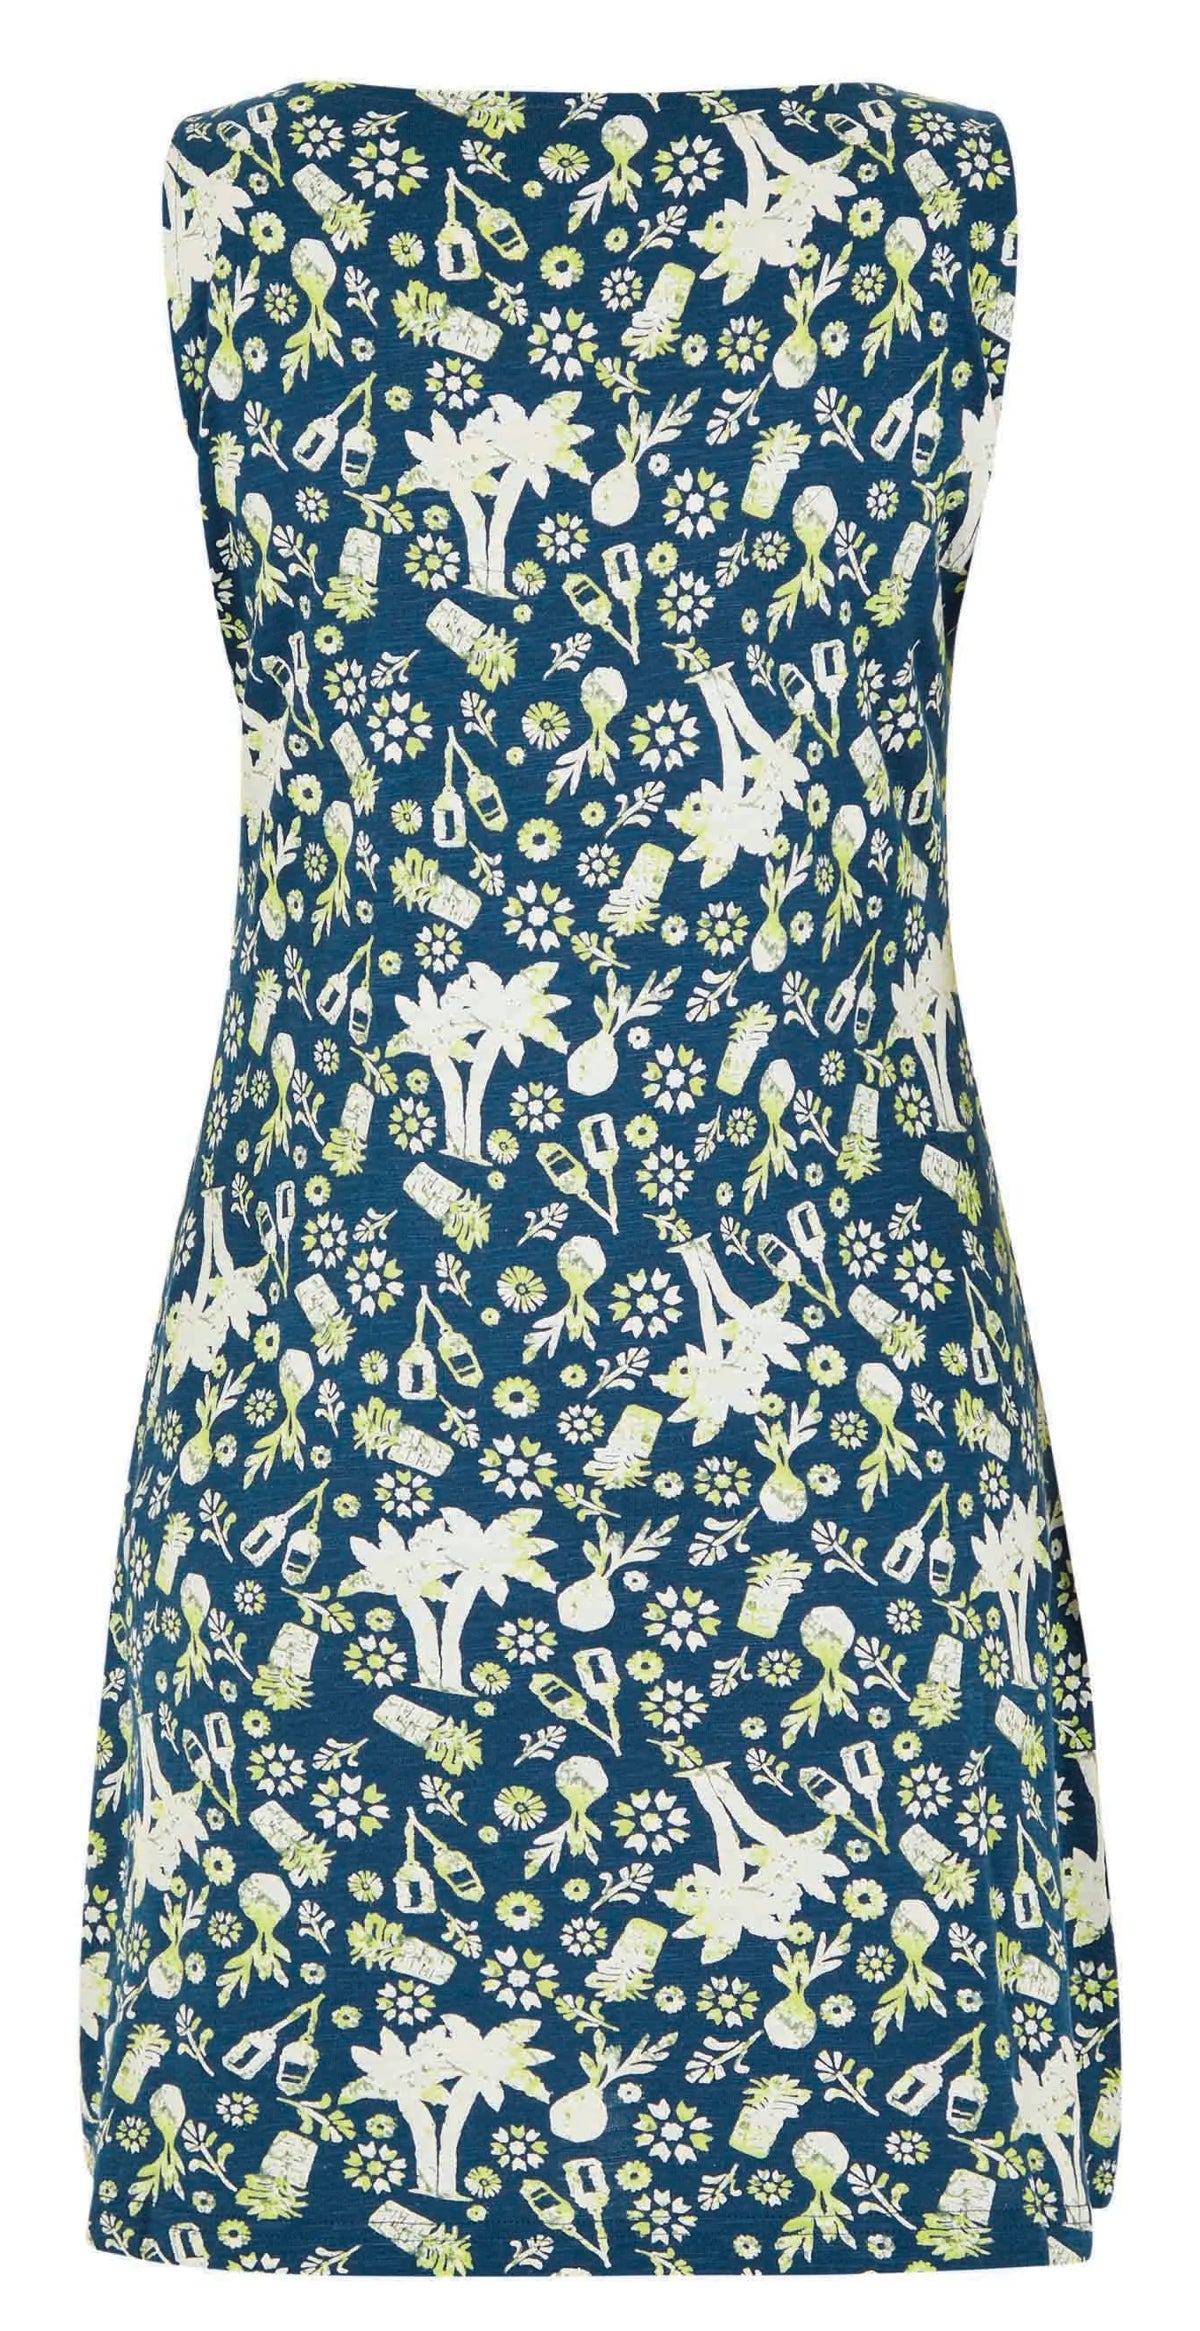 Ensign Blue with a tropical print women's sleeveless Indus tunic from Weird Fish.